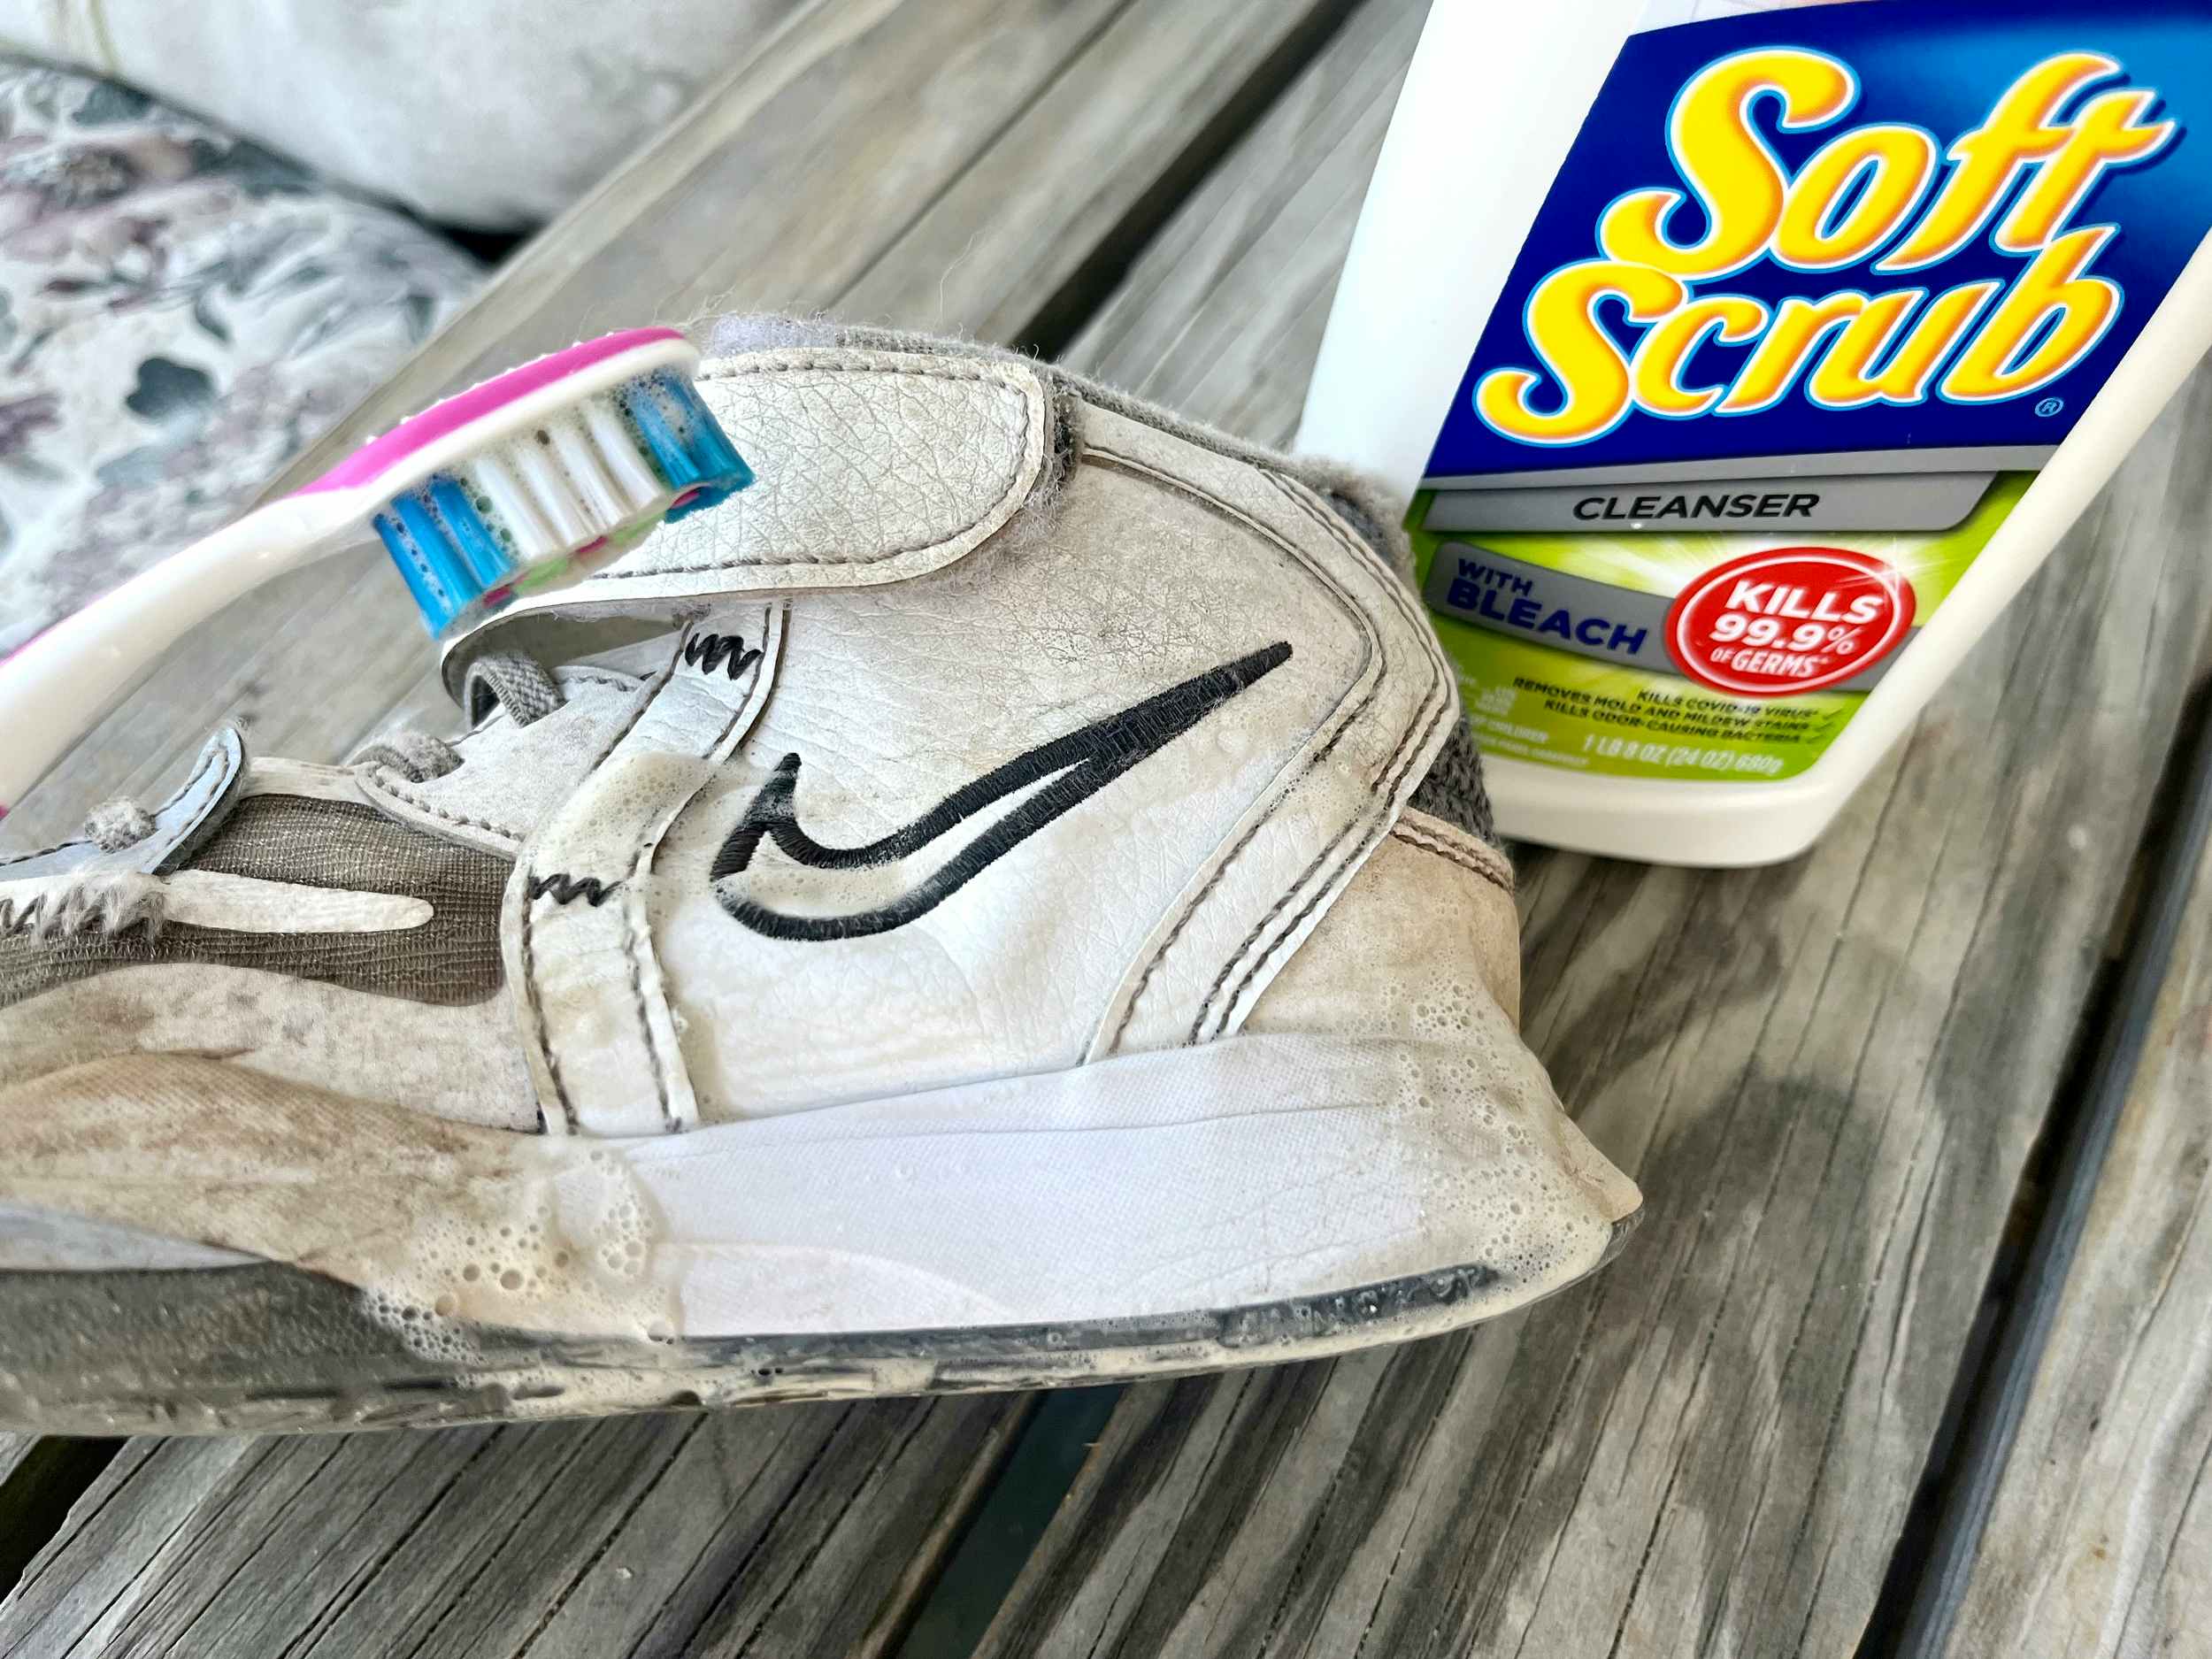 soft scrub cleanser with bleach and toothbrush for cleaning white sneakers